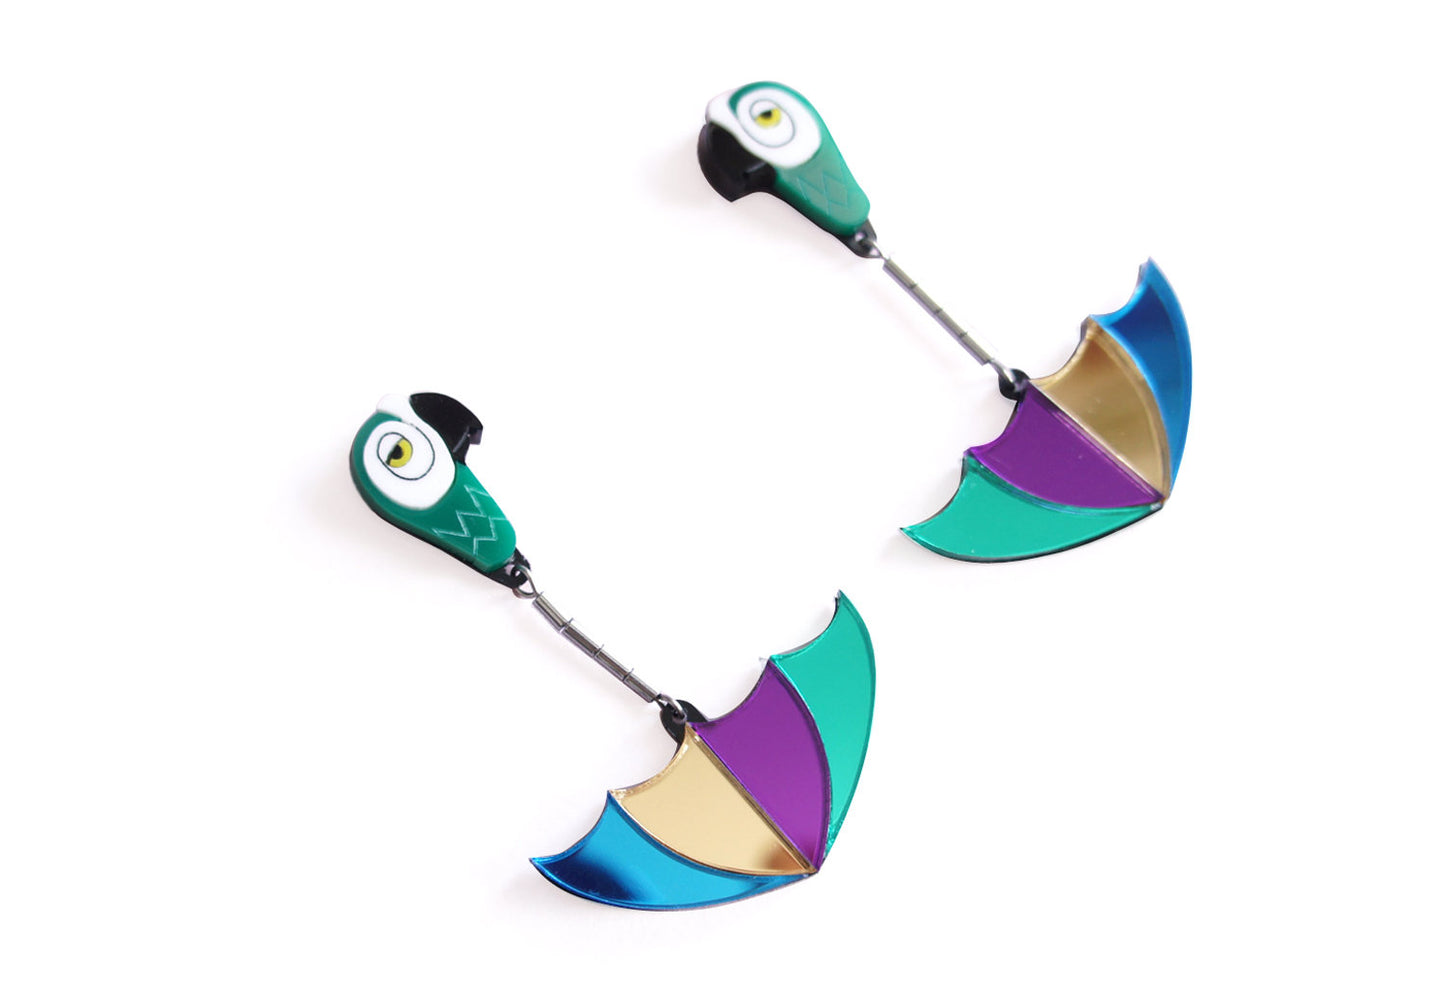 Mary Poppins Parrot Umbrella Earrings by LaliBlue